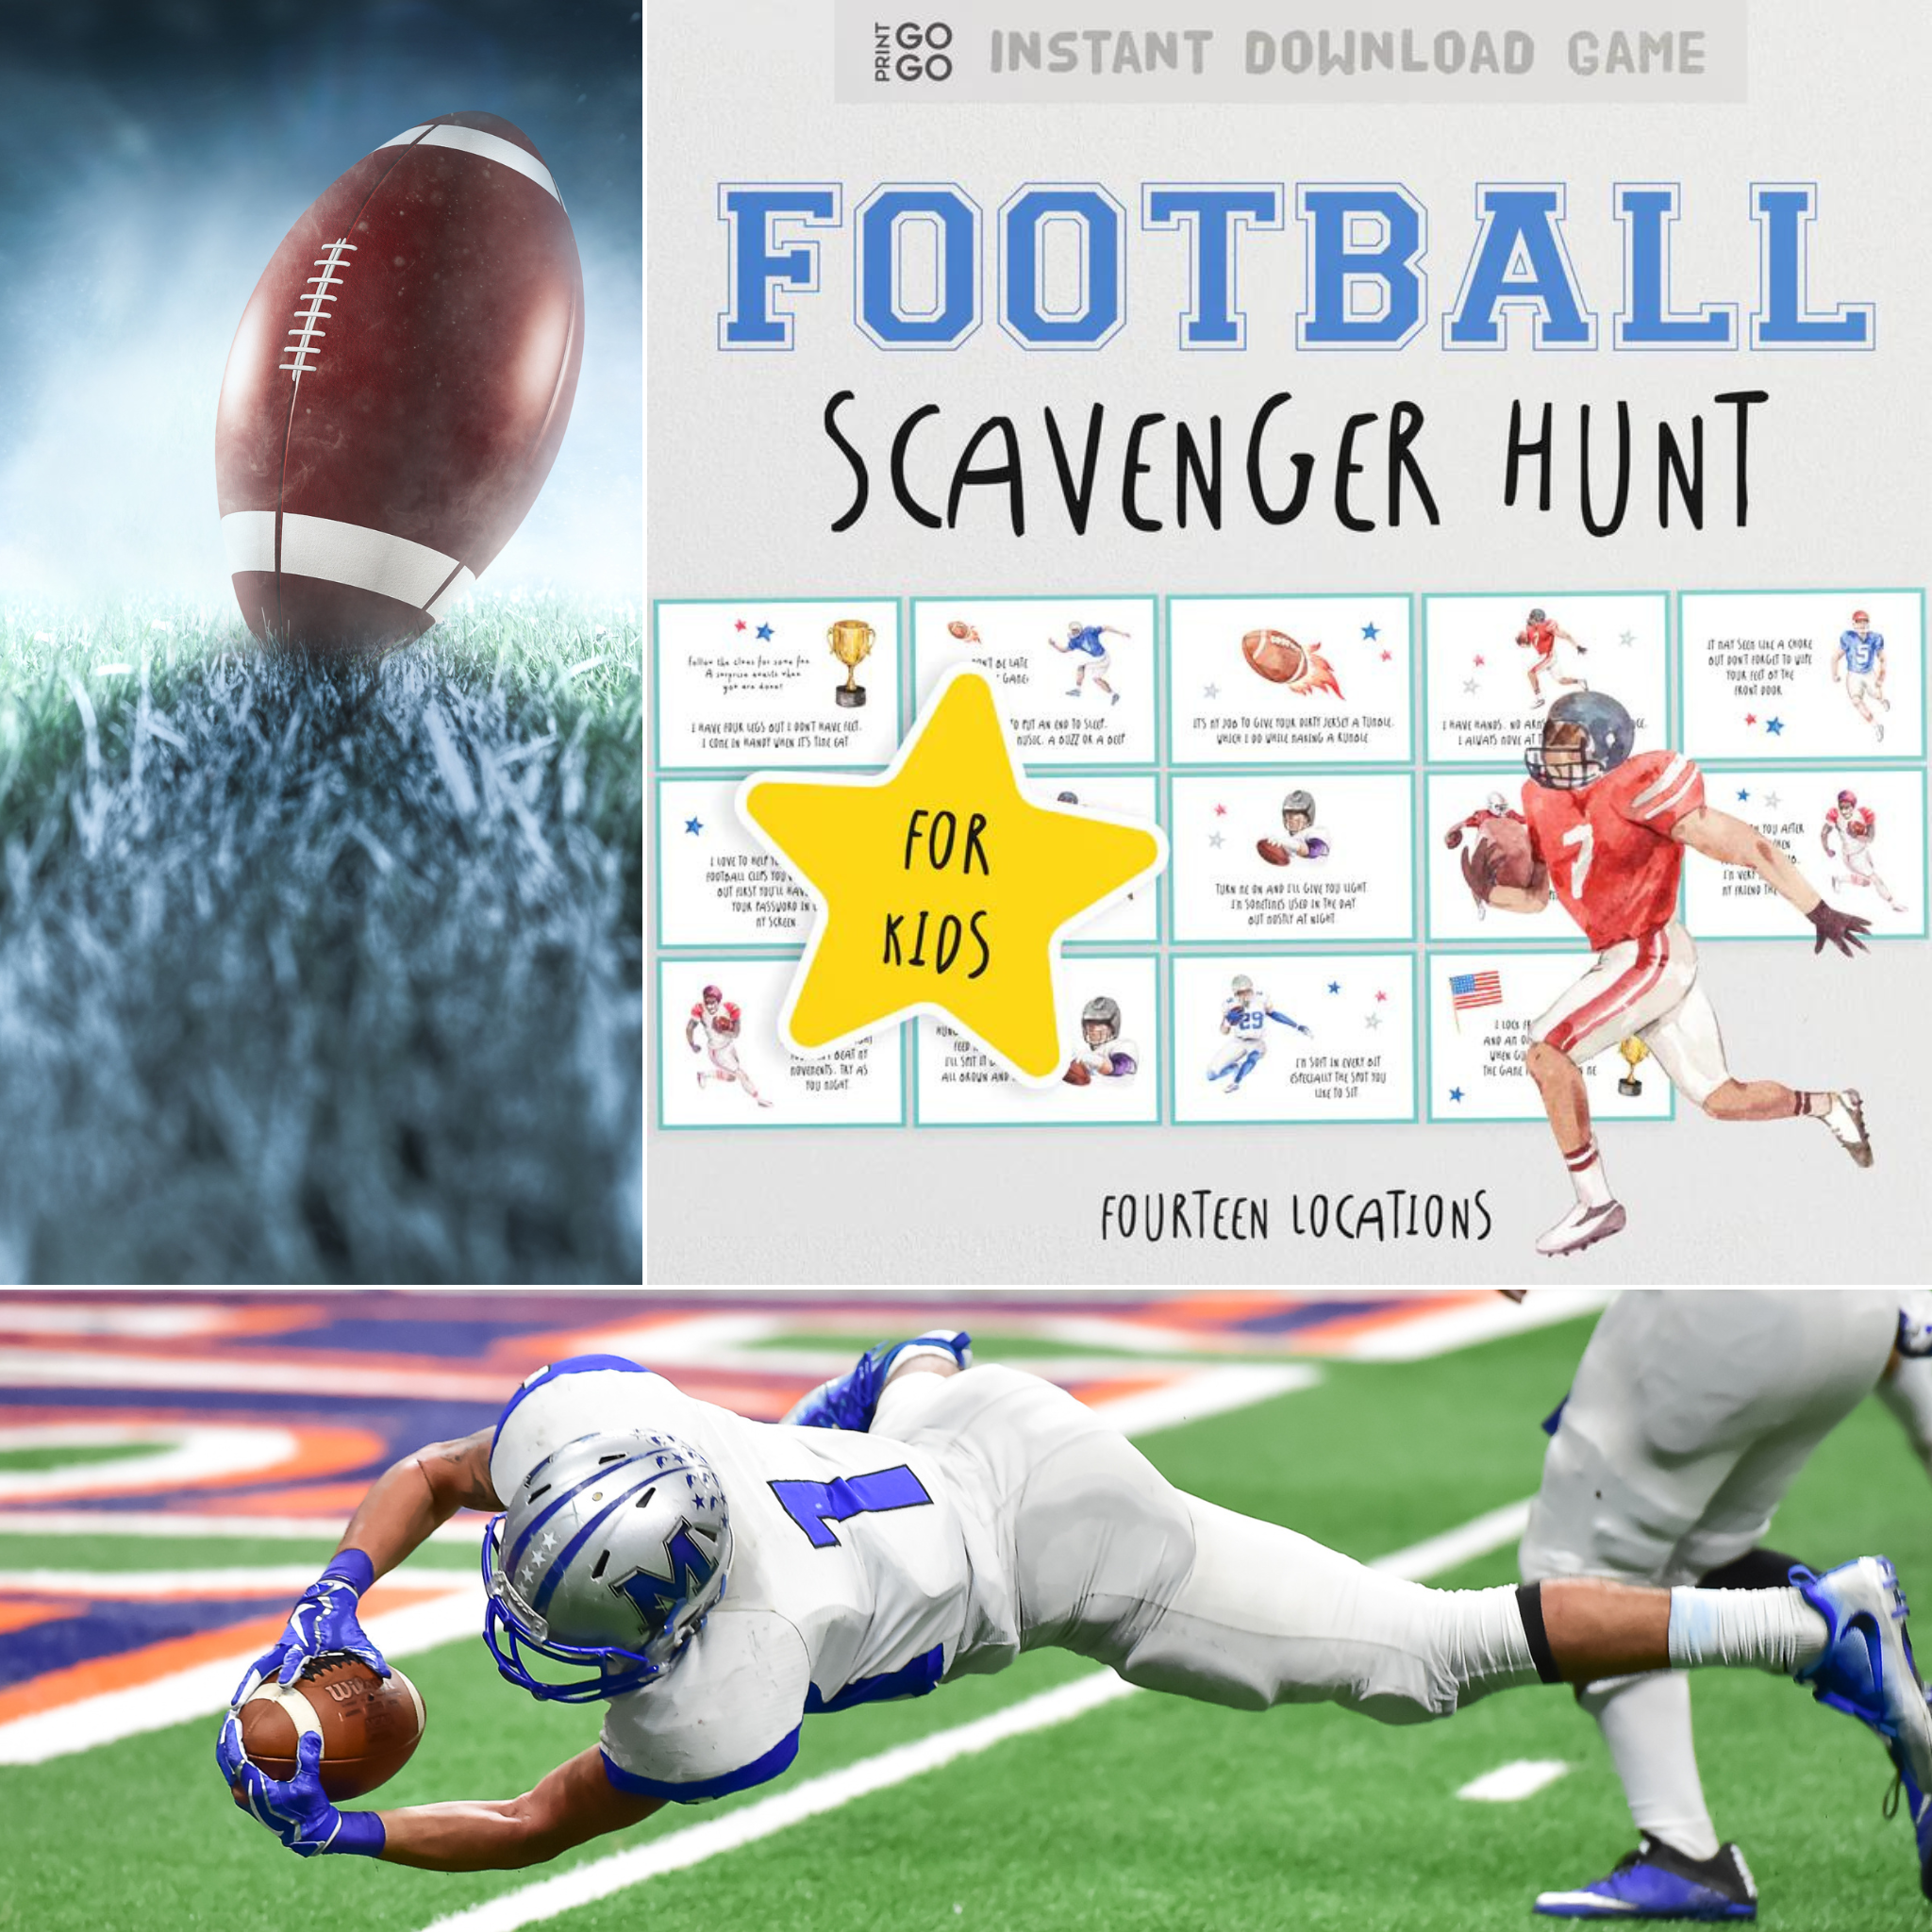 Score Big with This Football Scavenger Hunt for Kids!